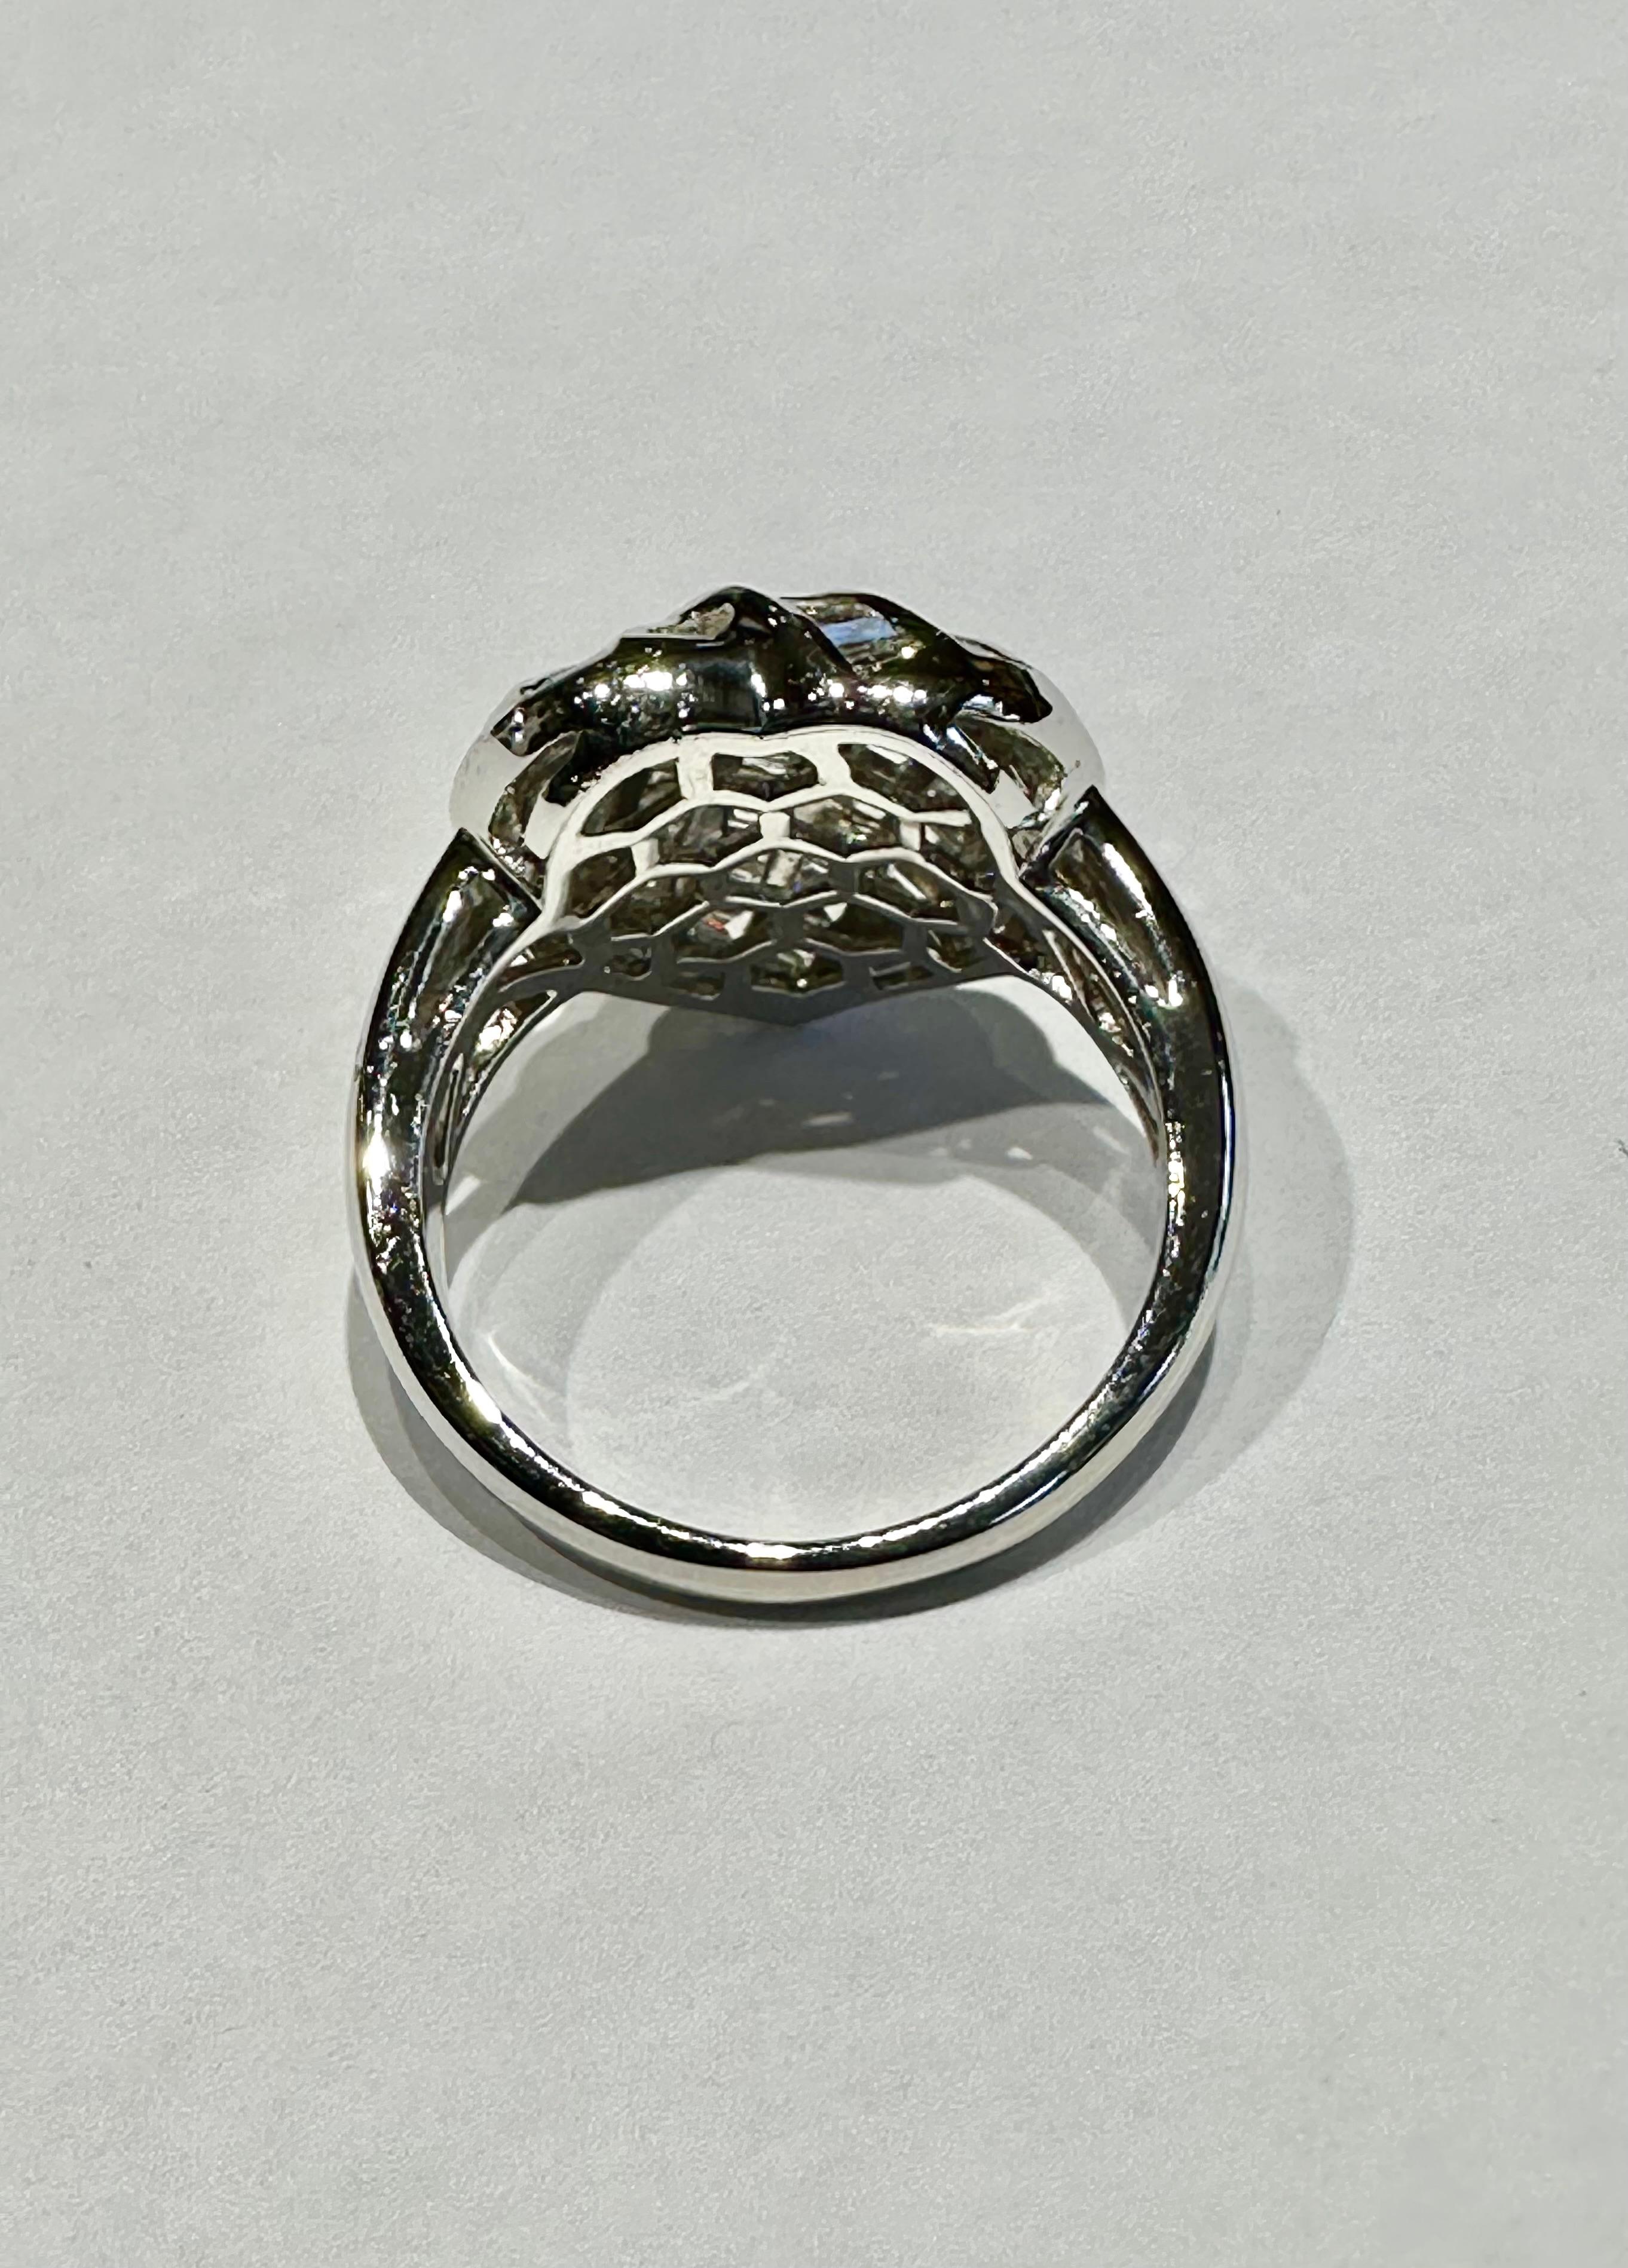 Ladies Beautiful Heart Shape Baguette Diamond Ring 1.80 CT 18K White Gold In New Condition For Sale In Laguna Beach, CA